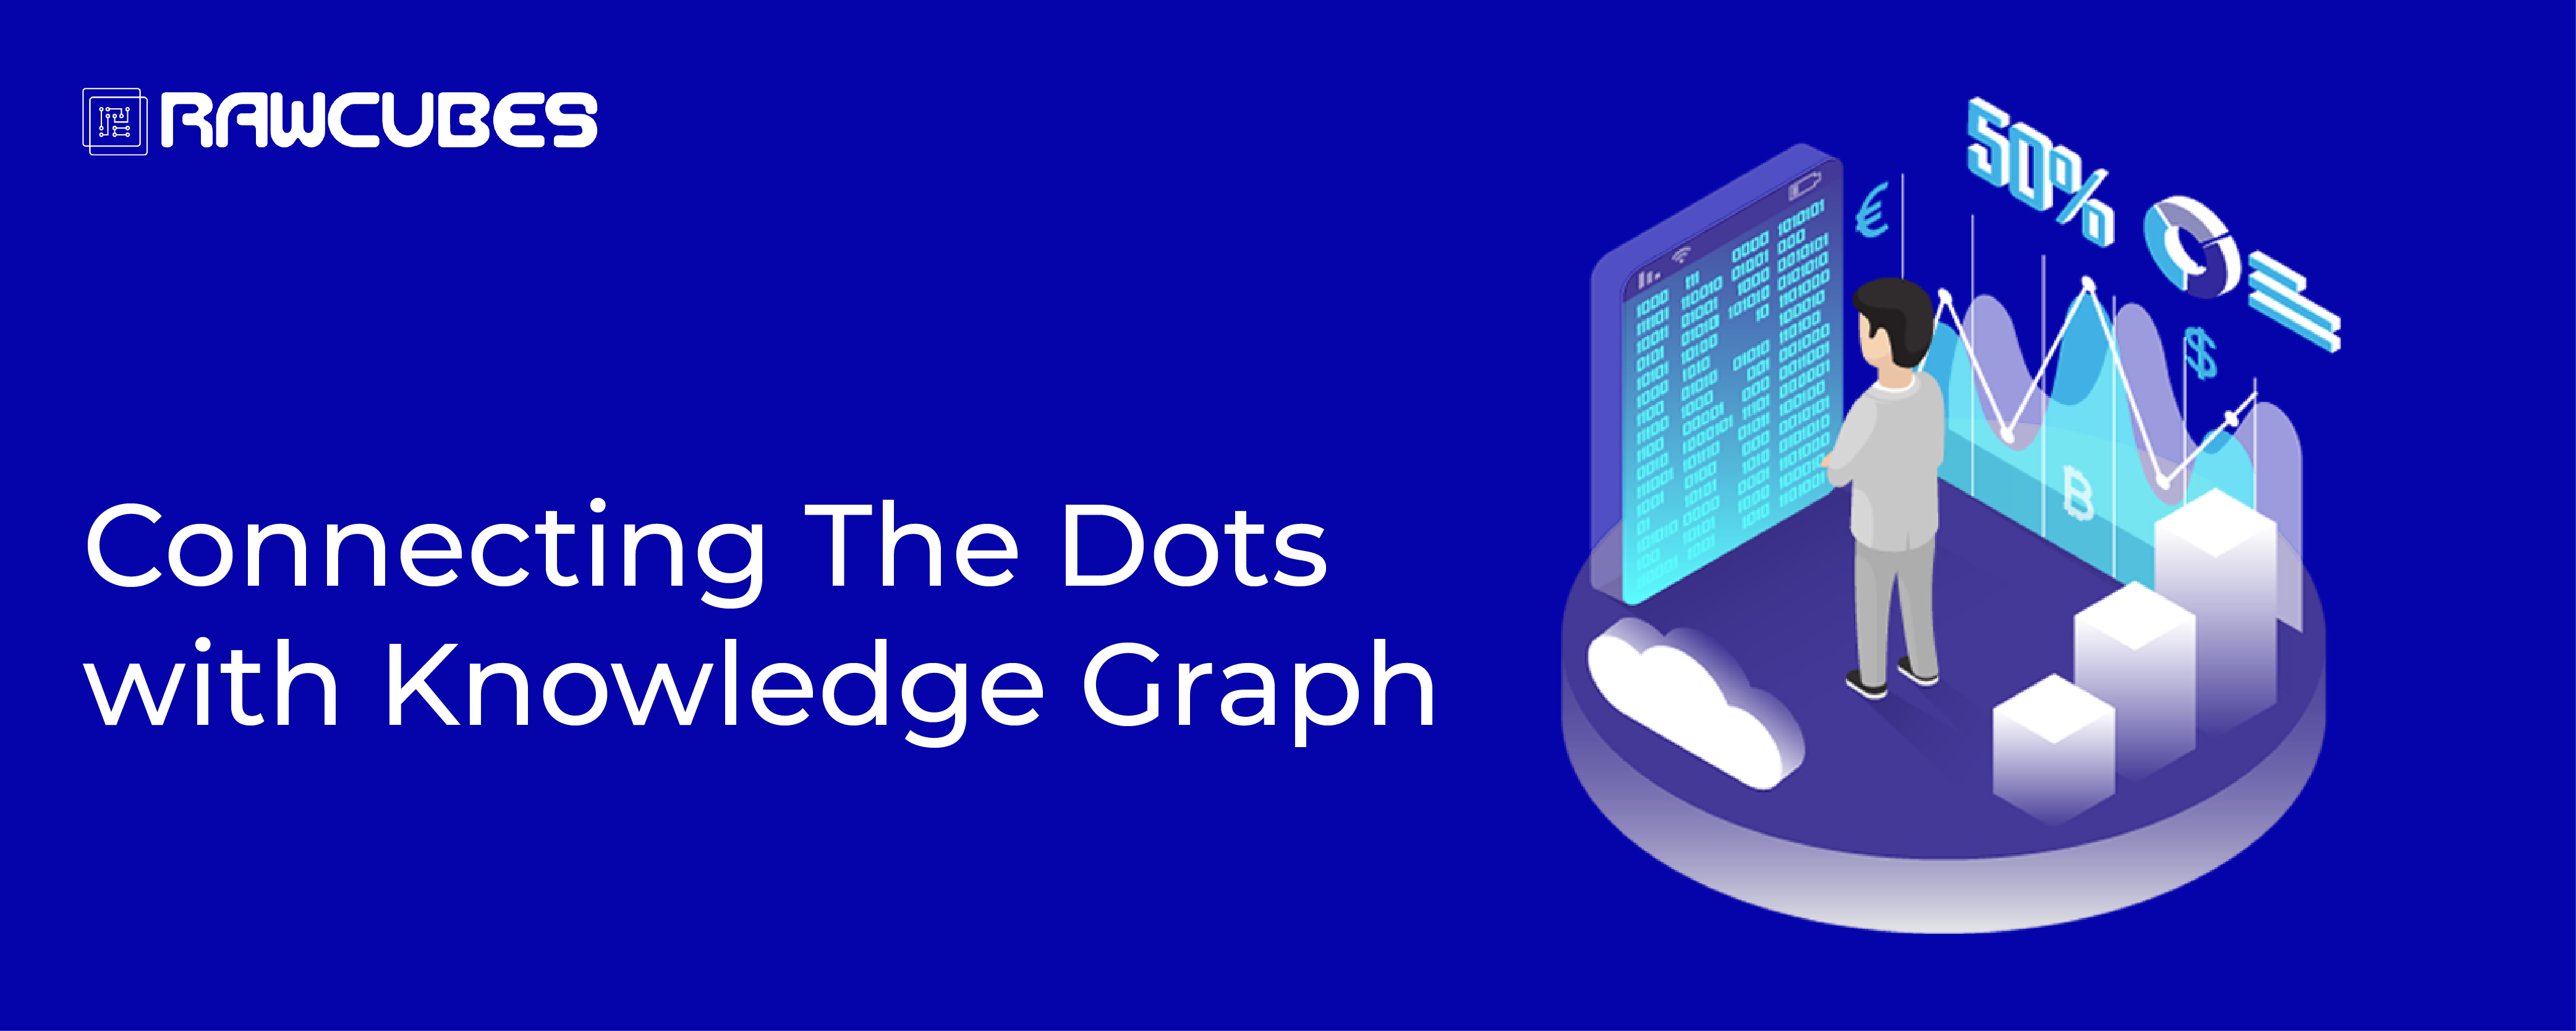 linking the right dots with knowledtge graph